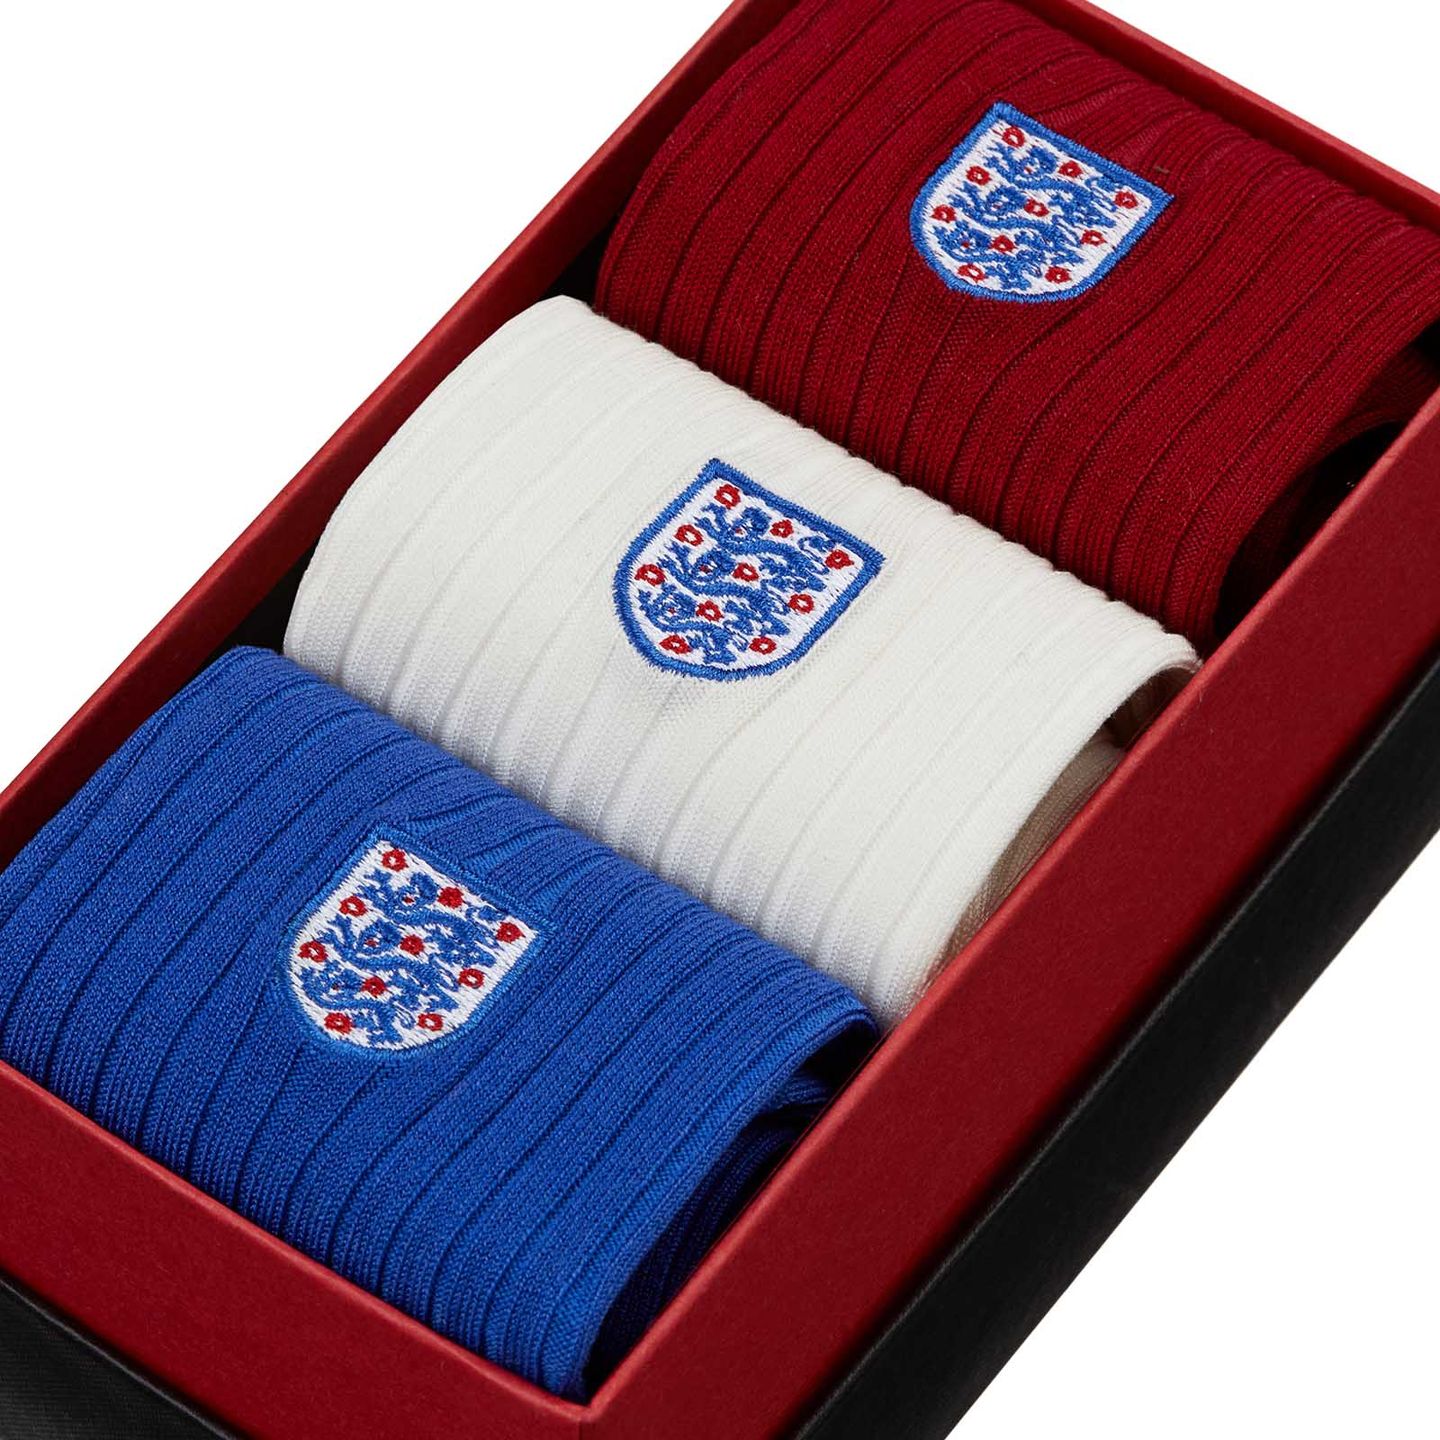 3 pairs of England socks in different colours